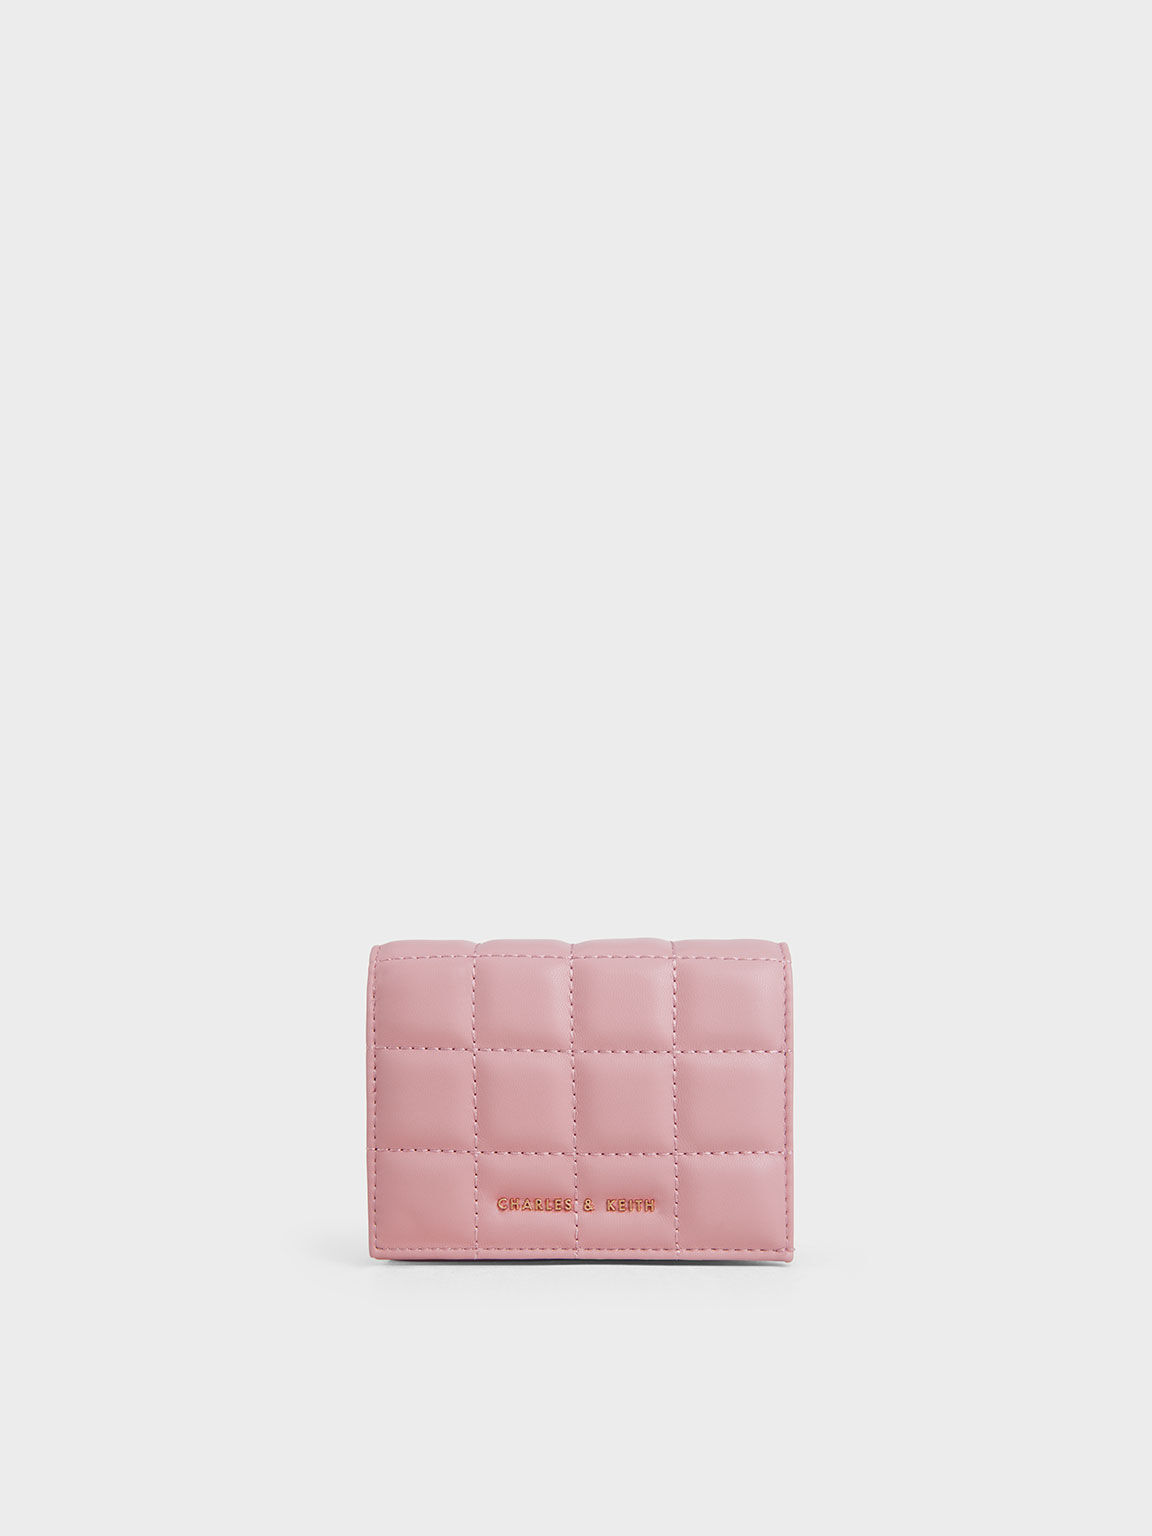 Women's Wallets at Charles & Keith - Bags